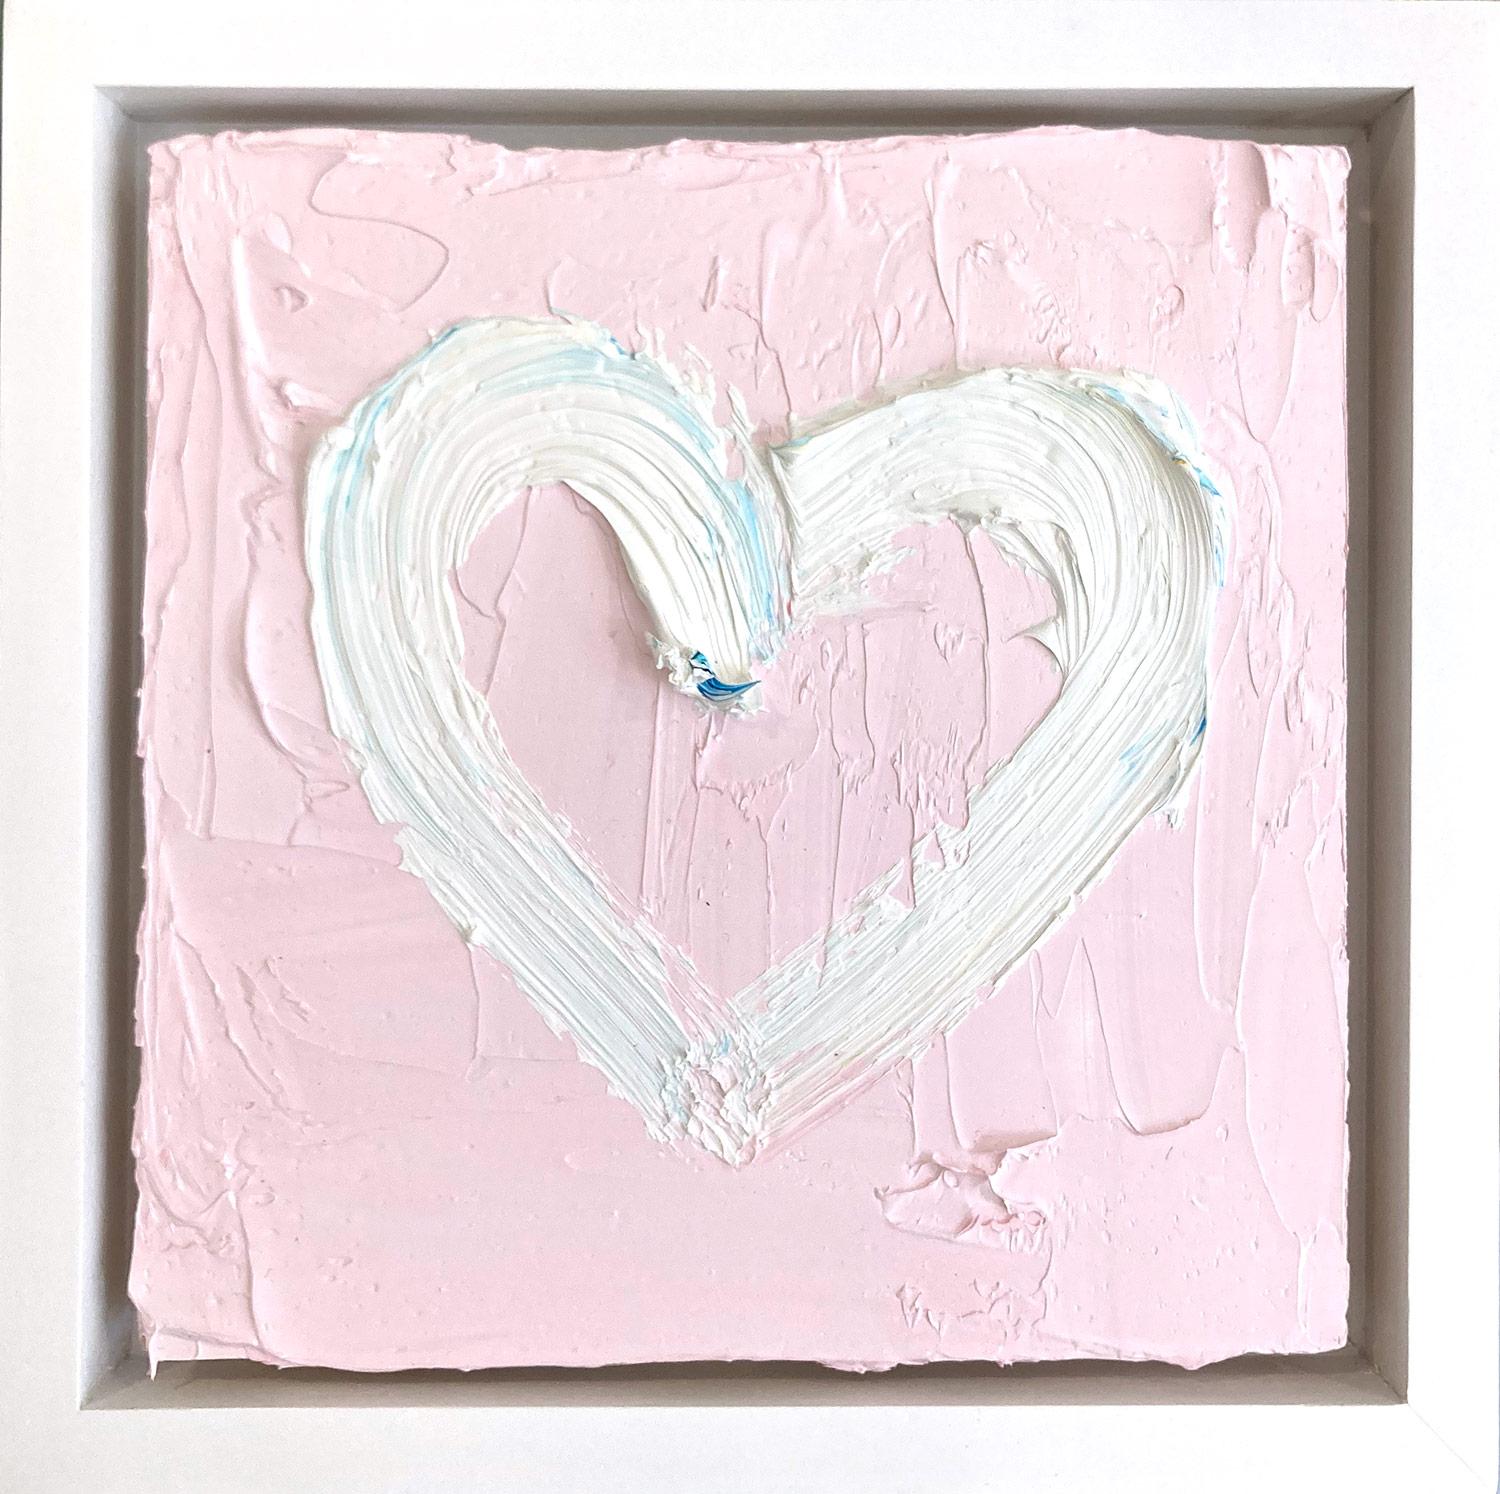 Cindy Shaoul Abstract Painting - "My Sweet Heart" White & Pink Pop Art Oil Painting with White Floater Frame